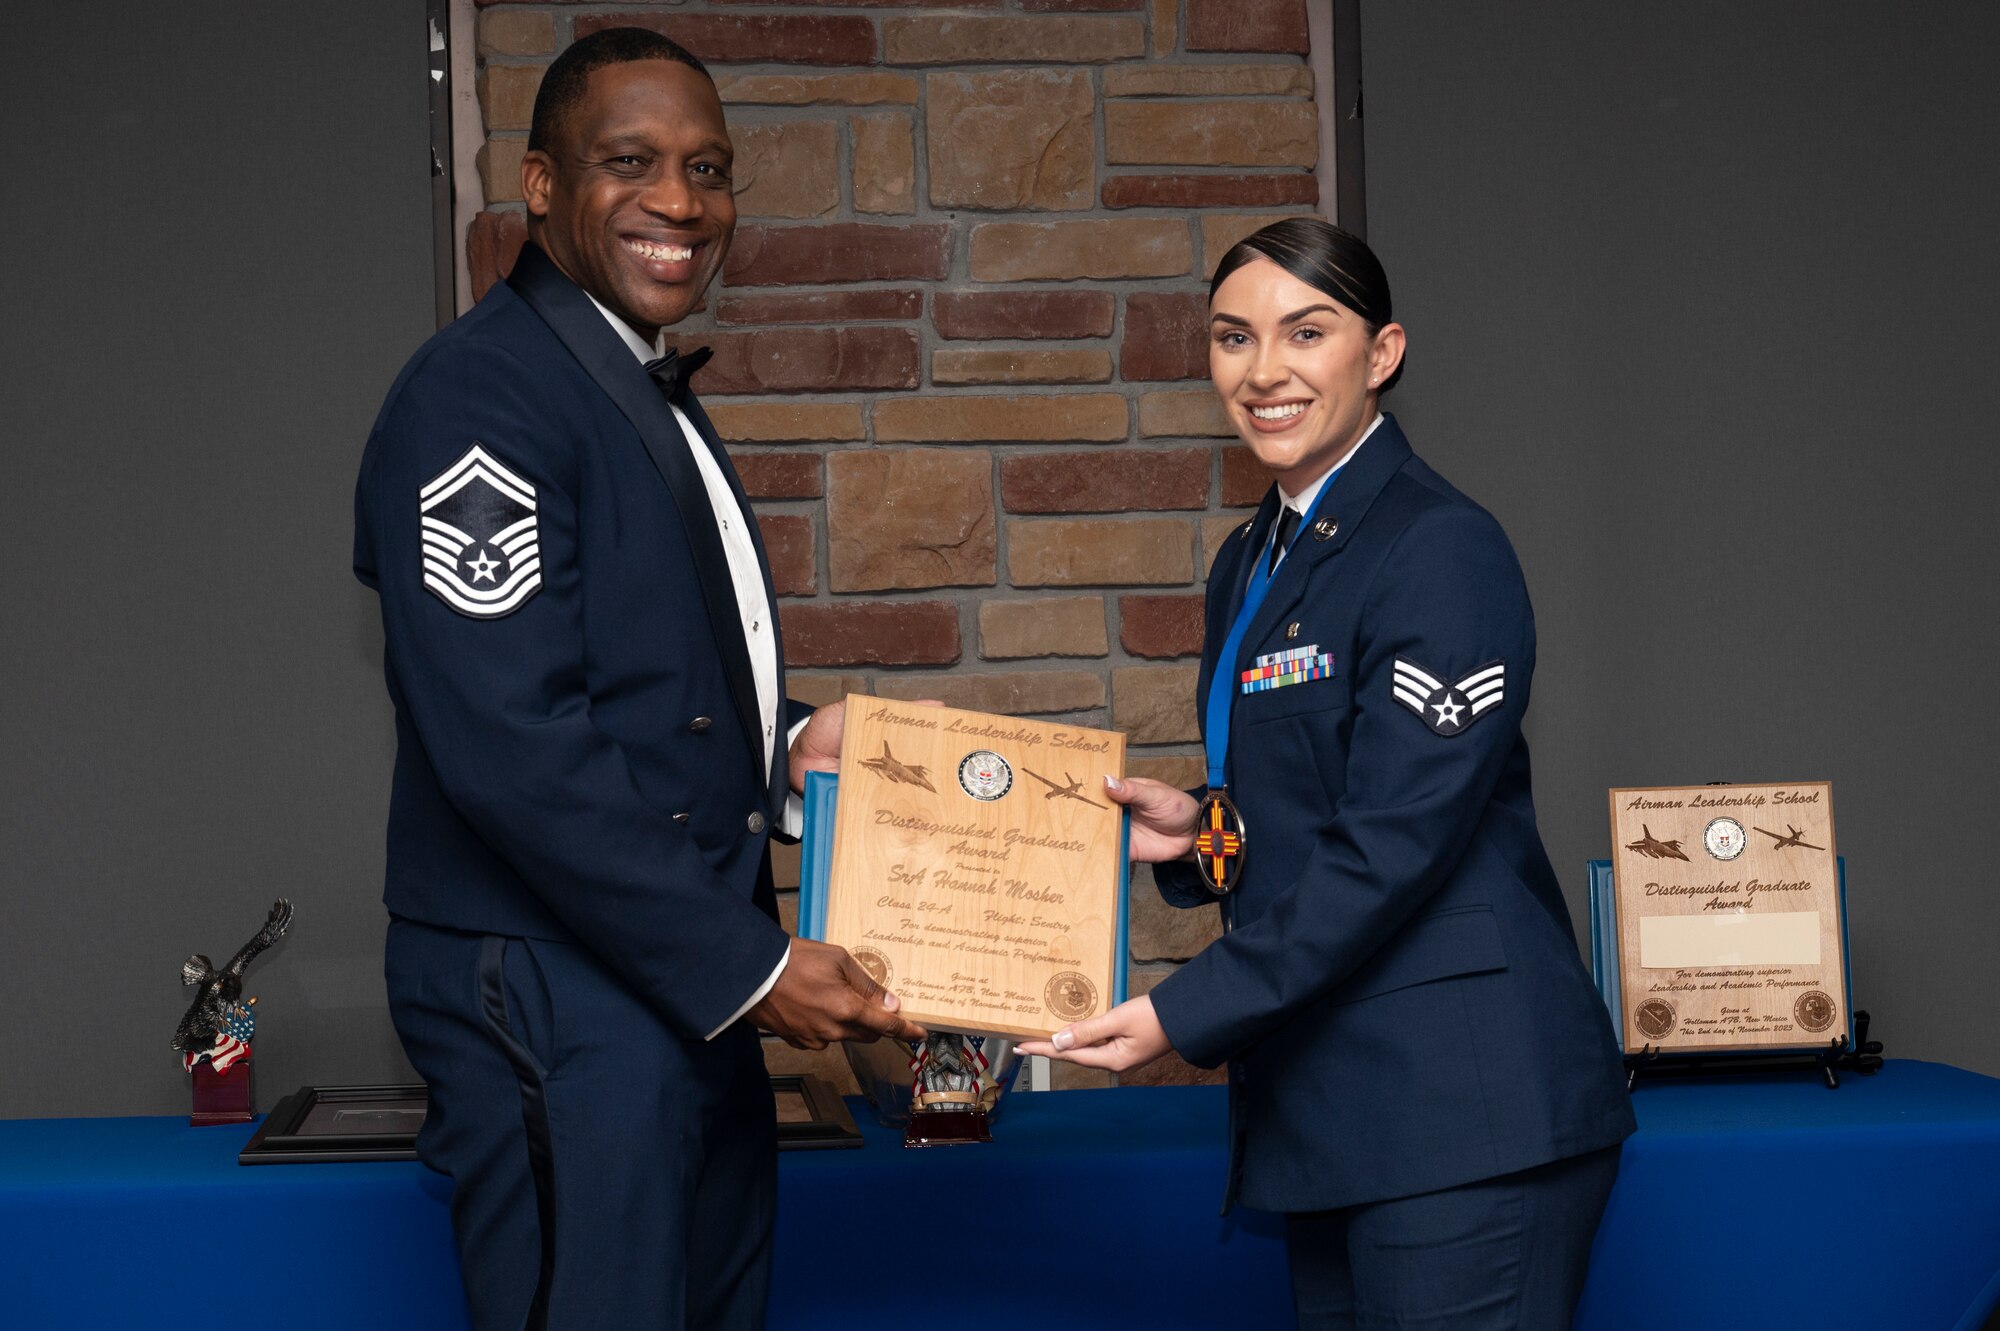 U.S. Air Force Senior Airman Hannah Mosher, right, Airman Leadership Graduate, accepts the Distinguished Graduate Award from Holloman Top III representative Senior Master Sgt. Rodney Dunn during the graduation of Joel C. Mayo ALS Class 24-A at Holloman Air Force Base, New Mexico, Nov. 2, 2023. The distinguished graduate award is presented to the top 10% of graduates for their performance in academic evaluations and demonstration of leadership. (U.S. Air Force photo by Airman 1st Class Michelle Ferrari)